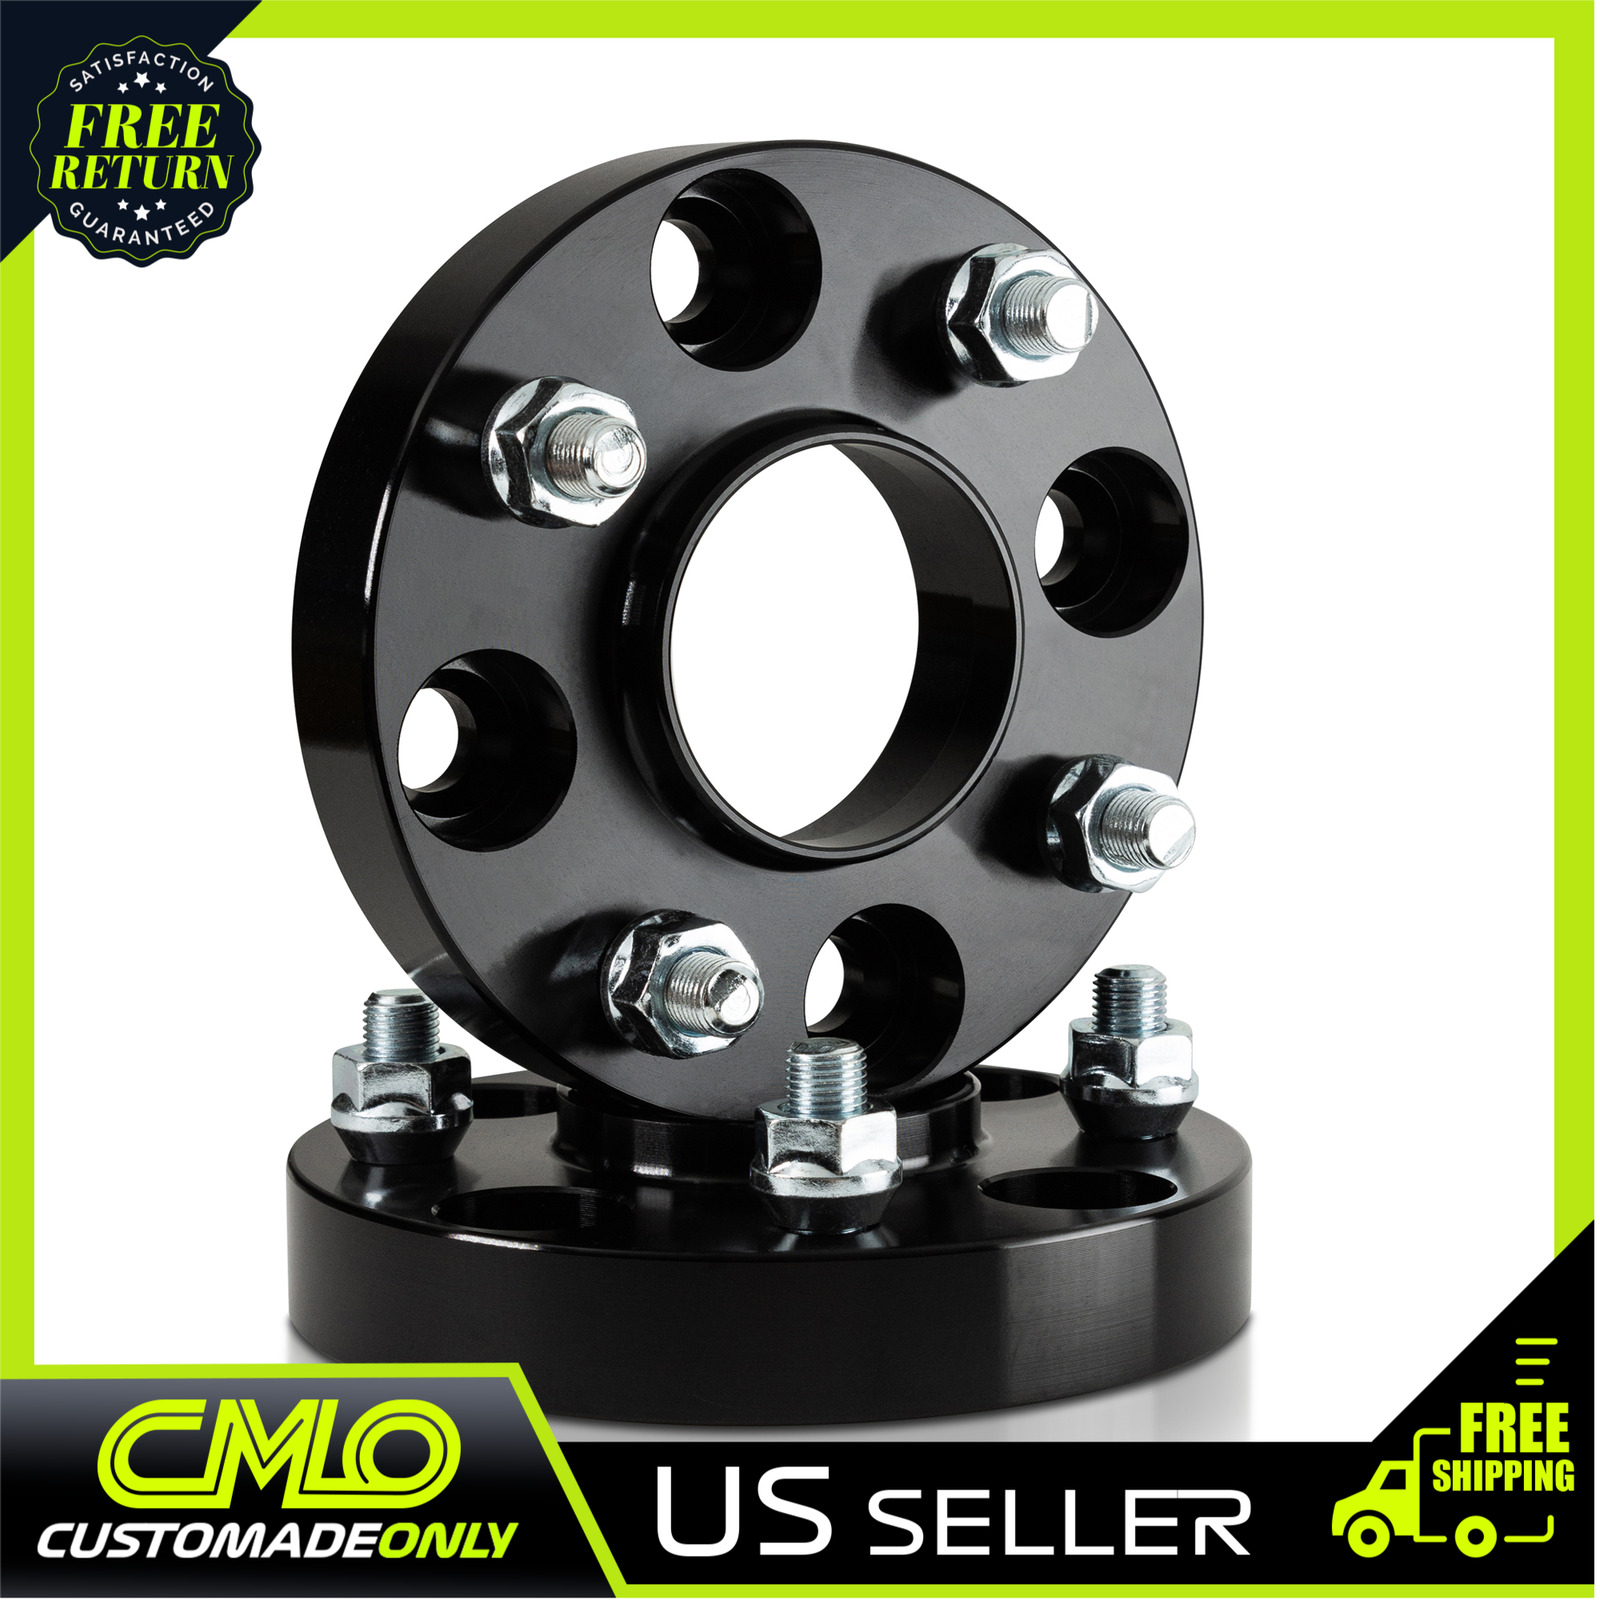 2) 25mm Black Hubcentric Wheel Spacers 4x100 For Honda Fit Civic Del Sol Integra